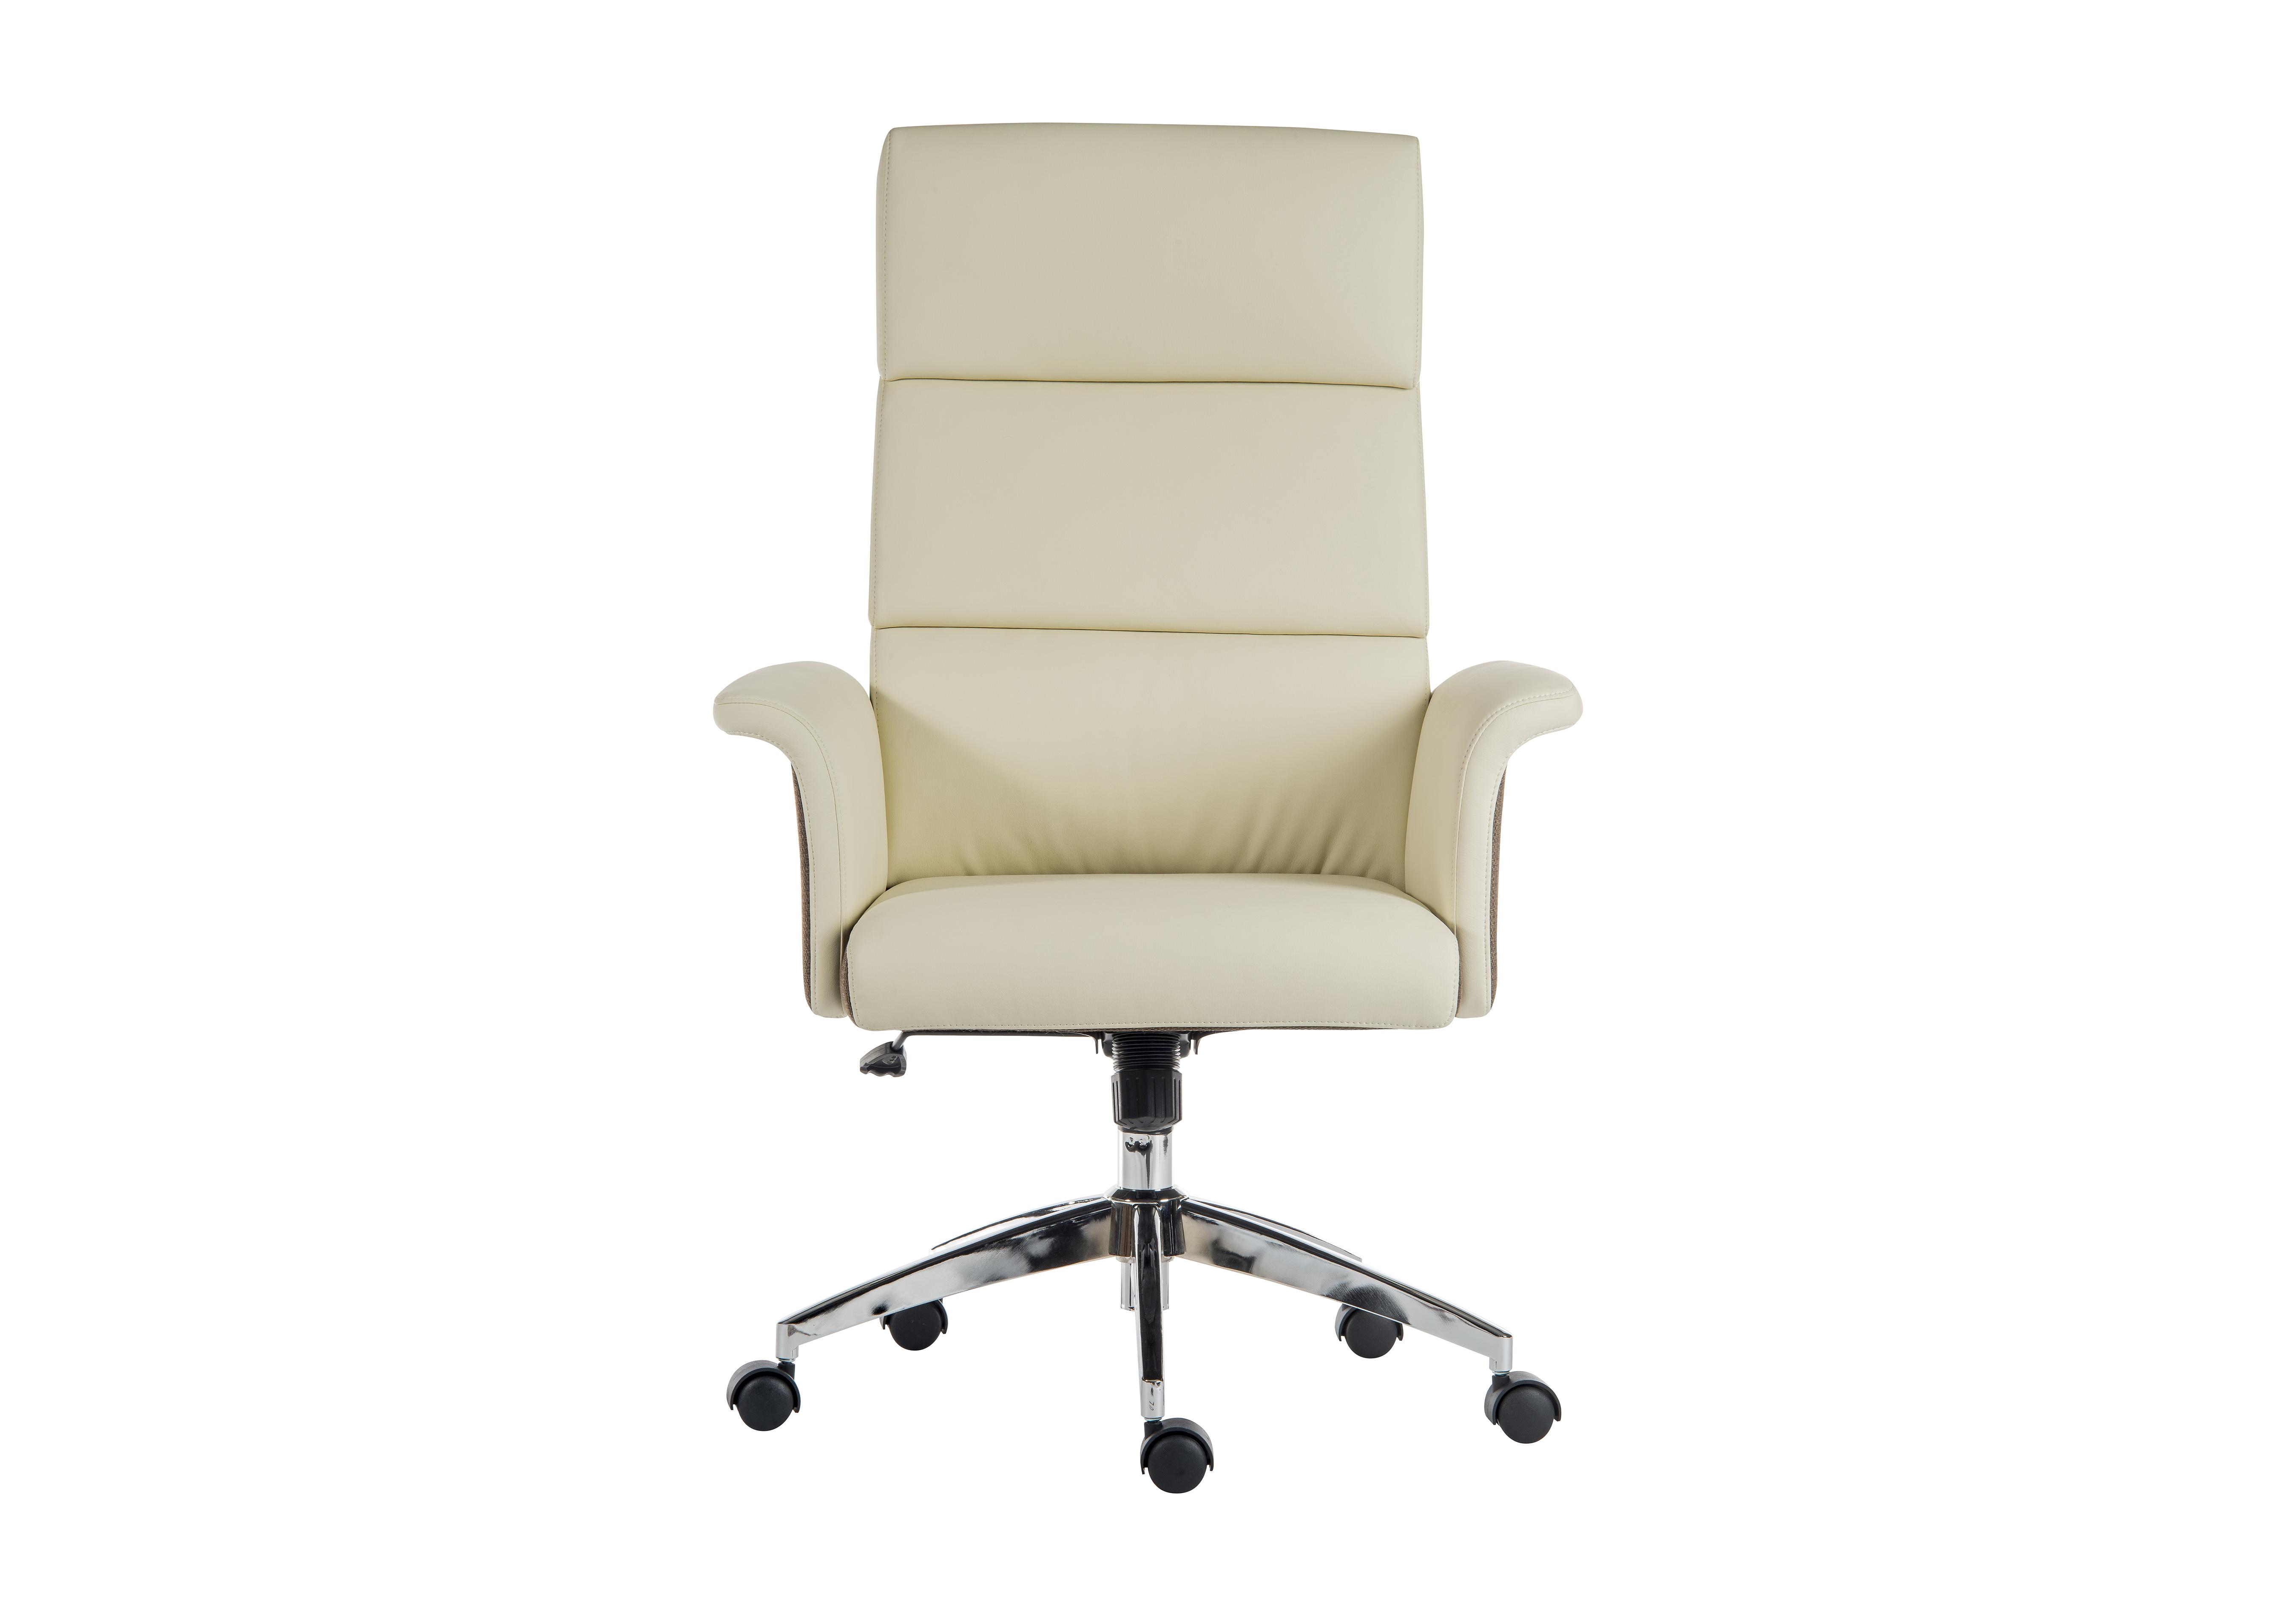 East River Elegance High-back Office Chair in Cream on Furniture Village